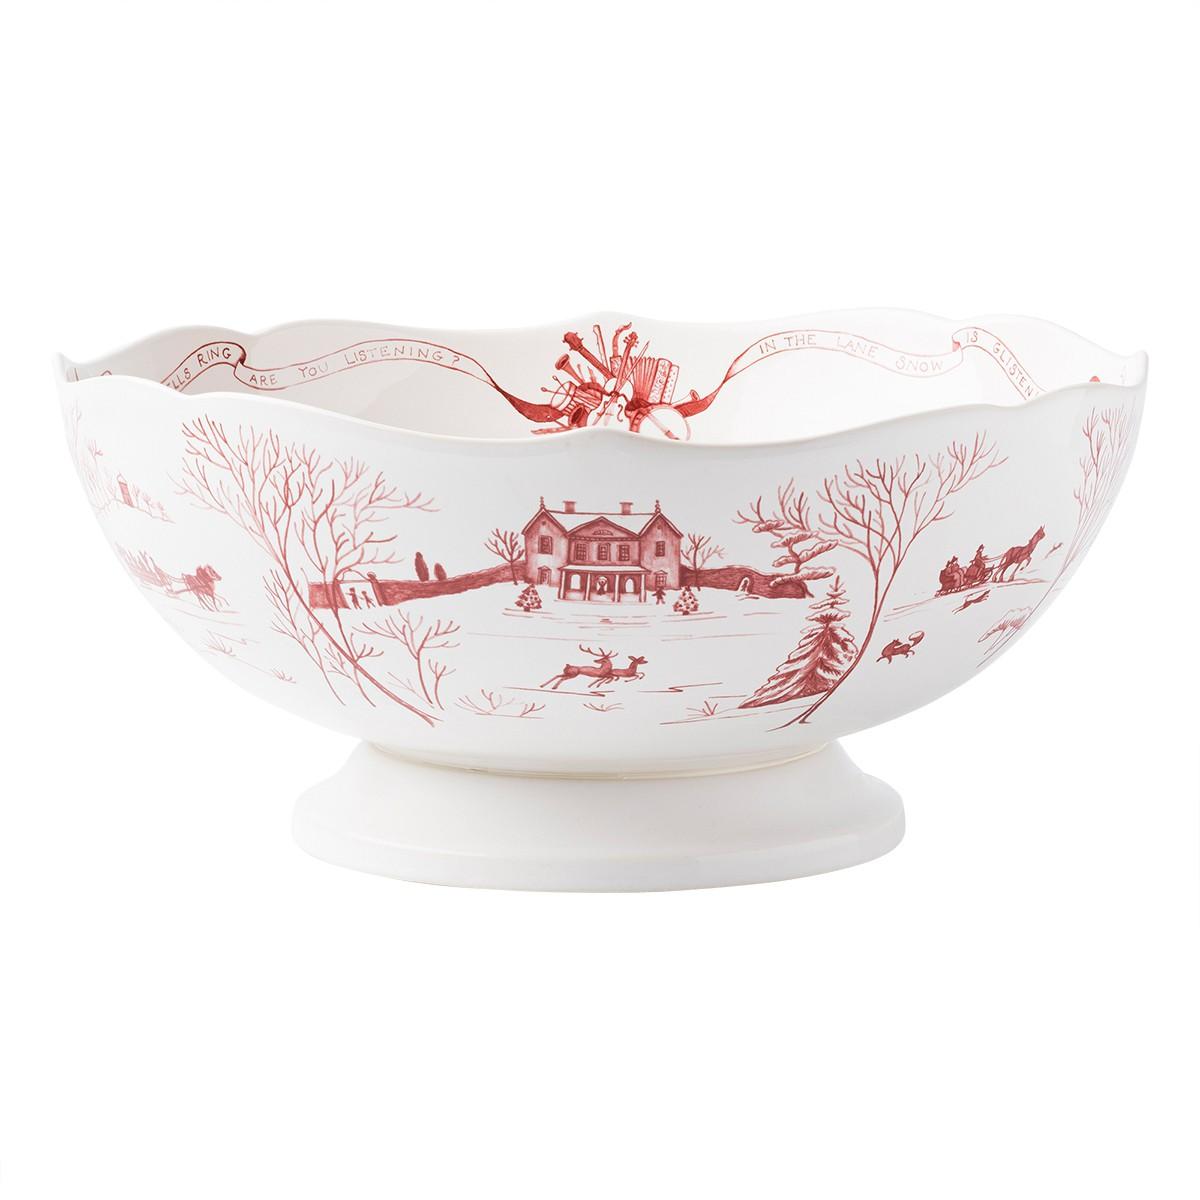 Country Estate Ruby Centerpiece Bowl - 13"